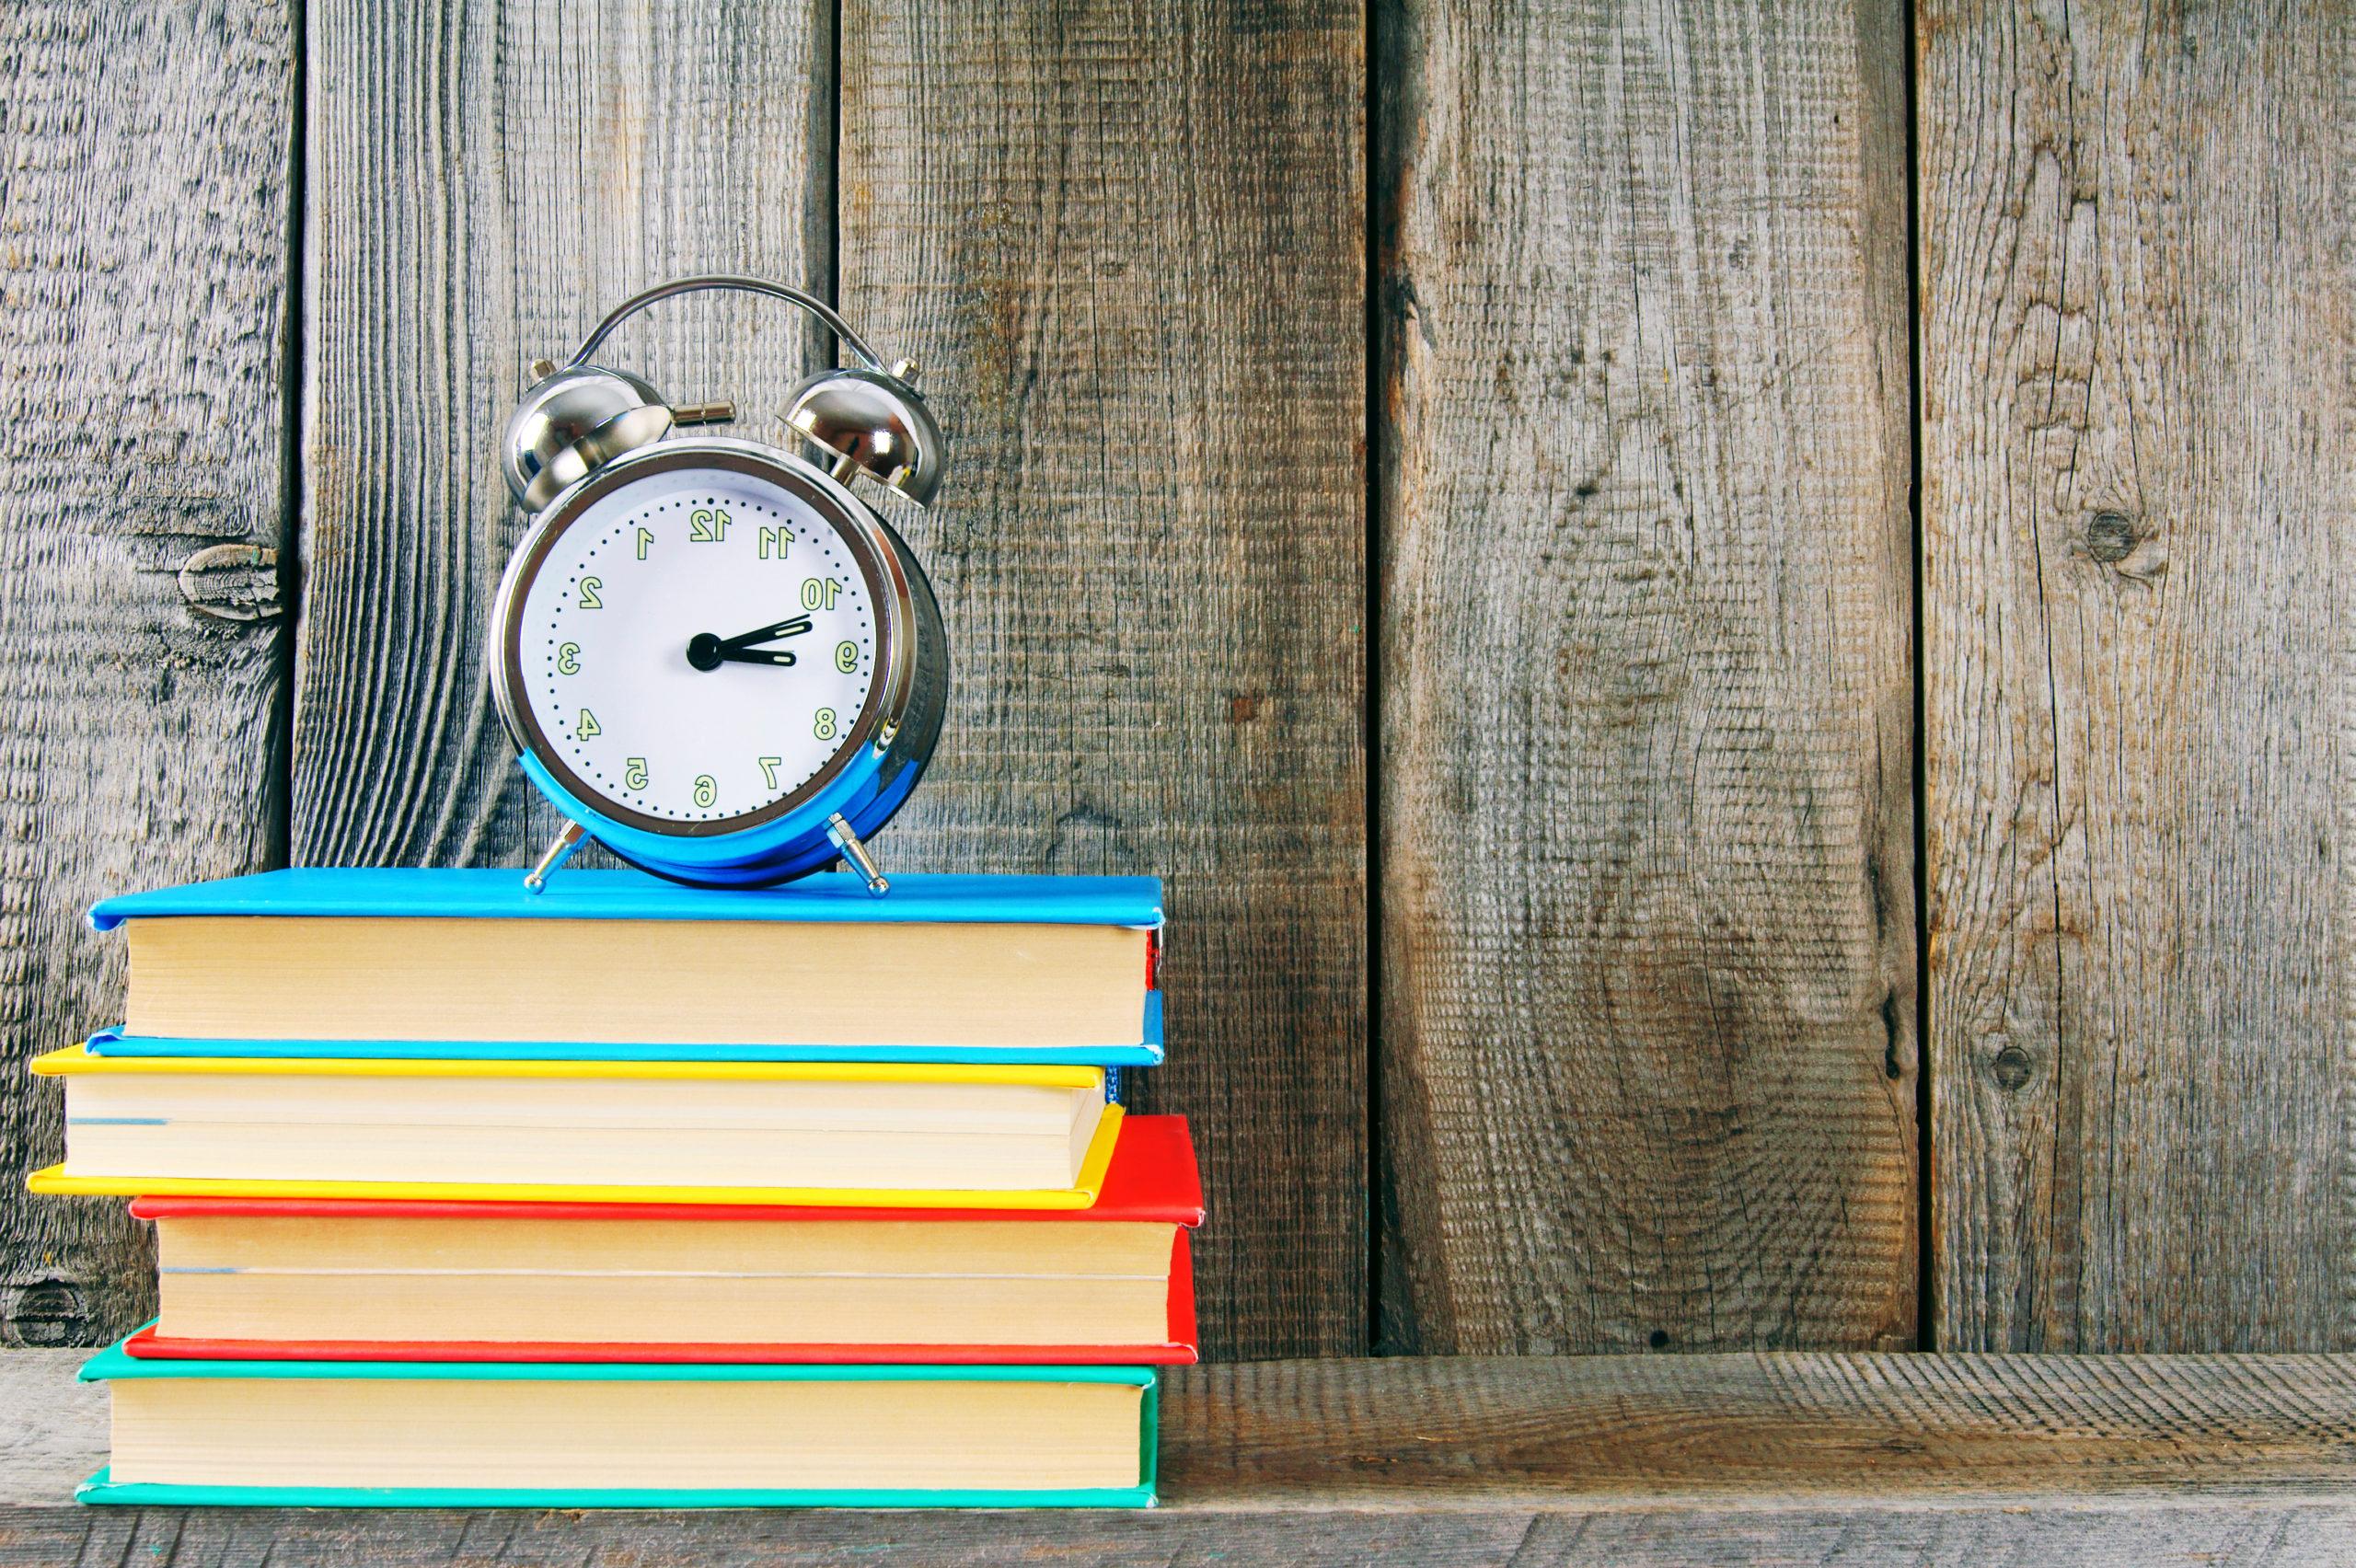 An alarm clock sitting on top of a brightly colored stack of books